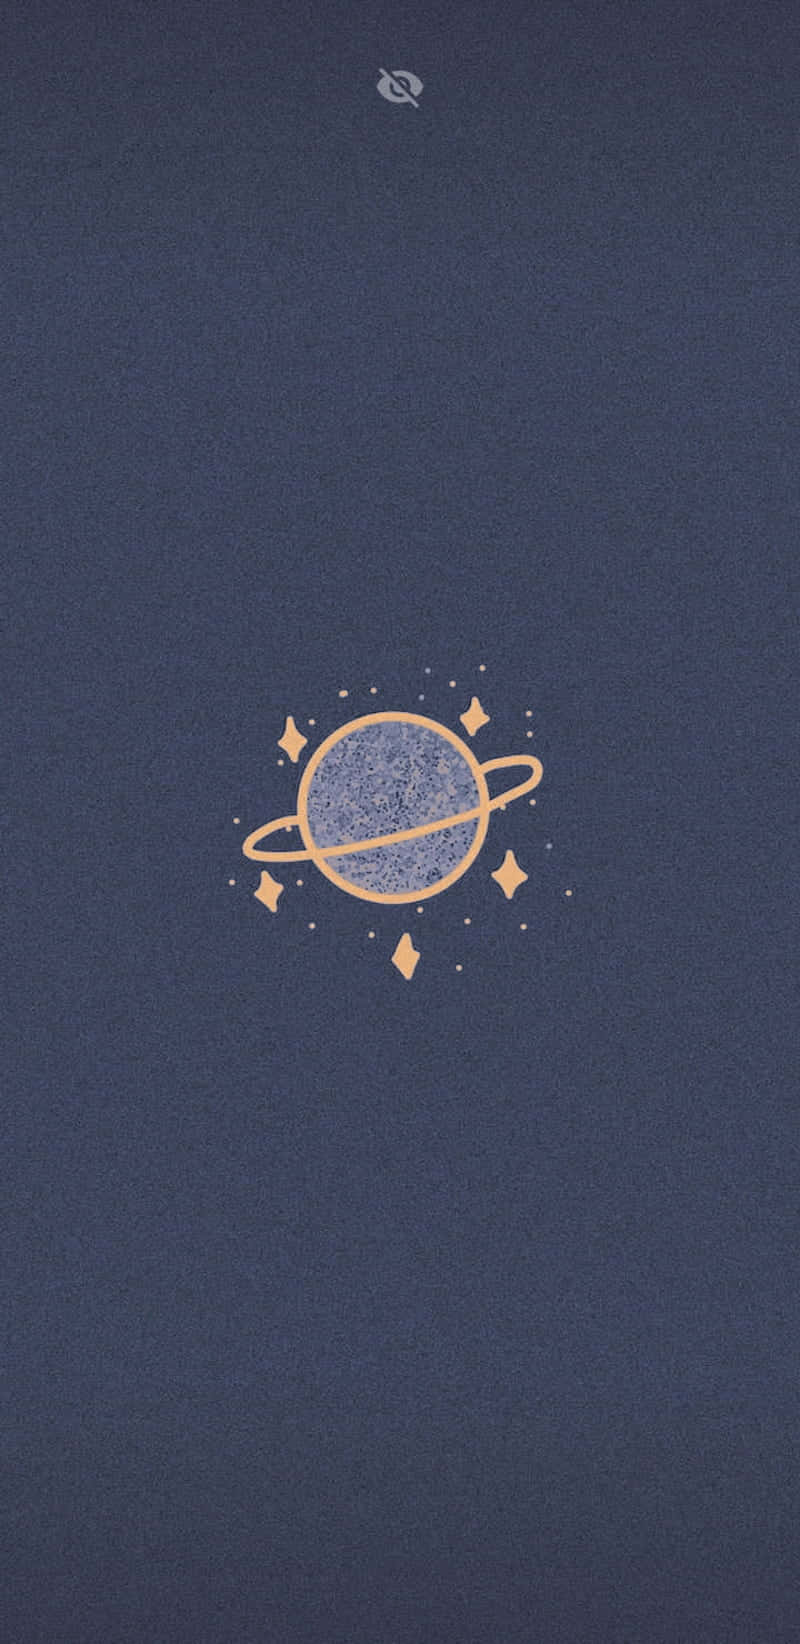 Get Lost In Our Lovely Solar System! Background